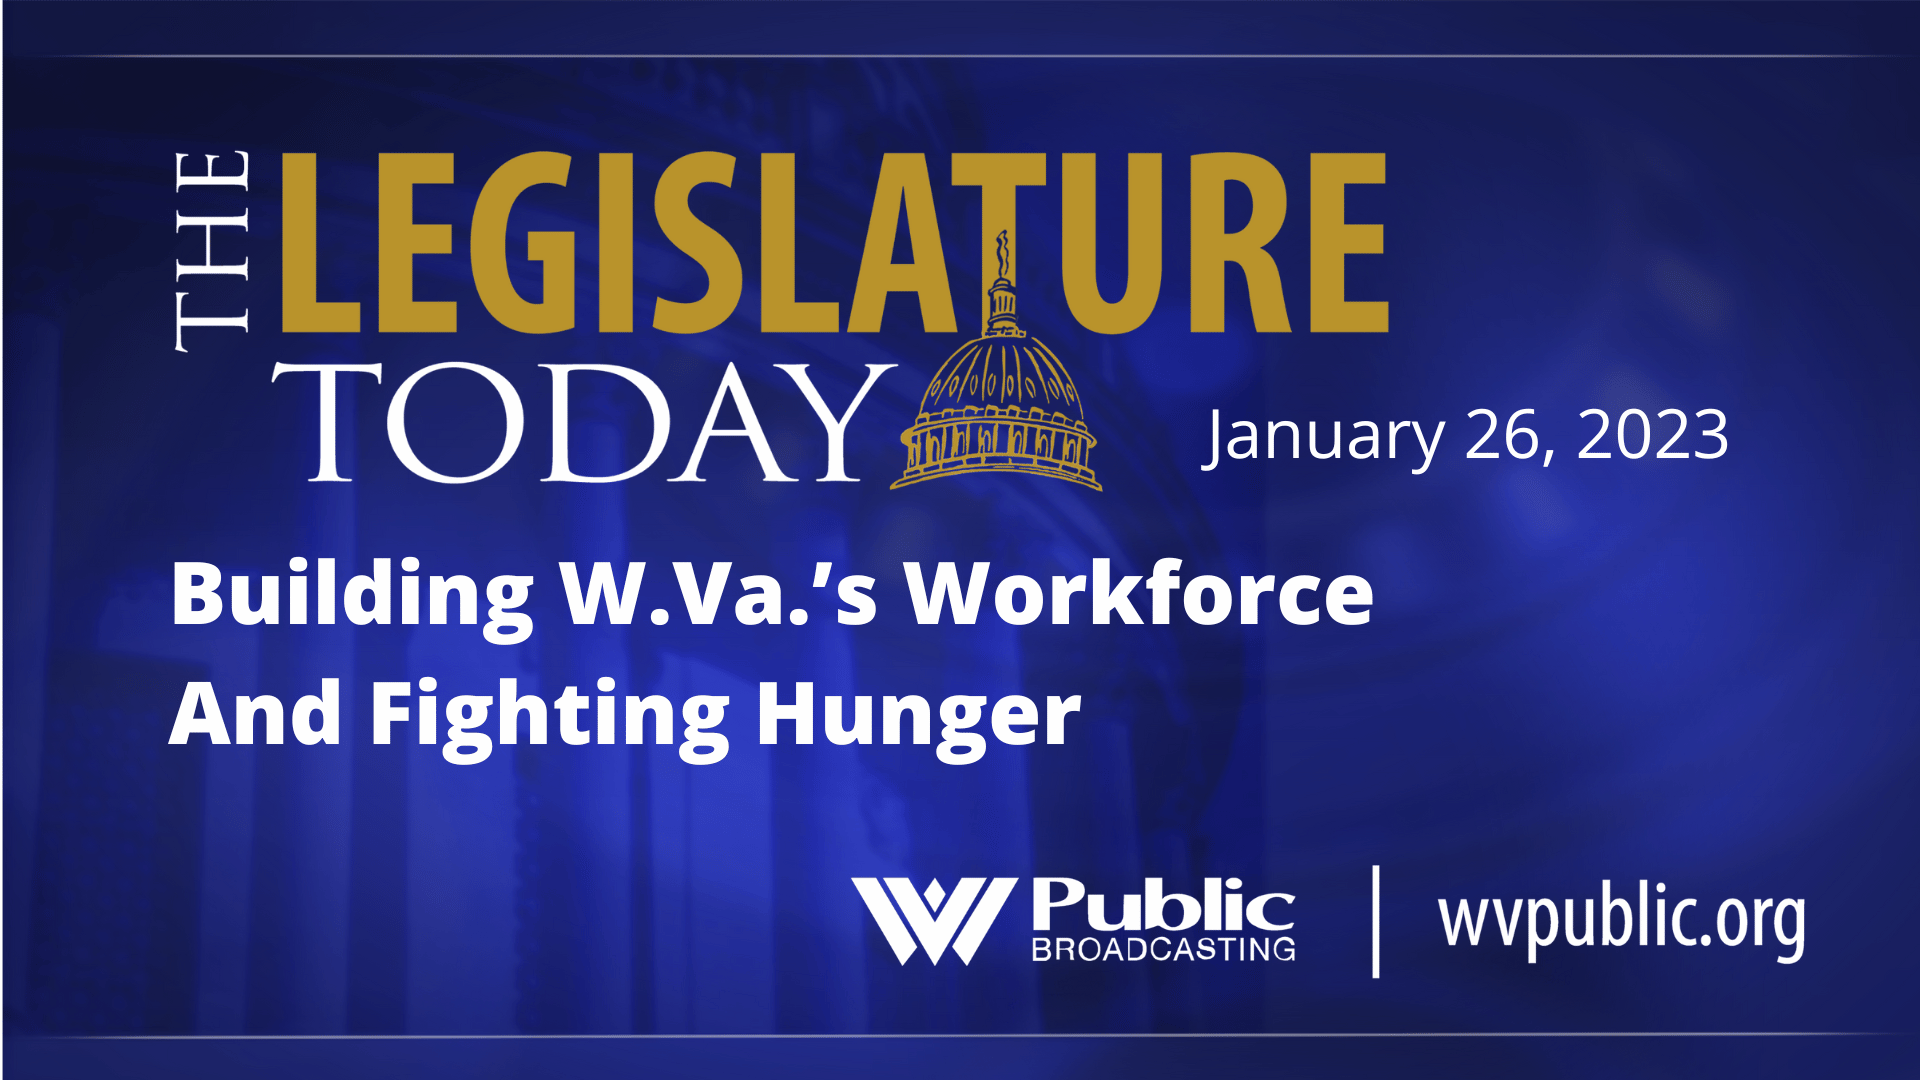 Building W.Va.’s Workforce And Fighting Hunger